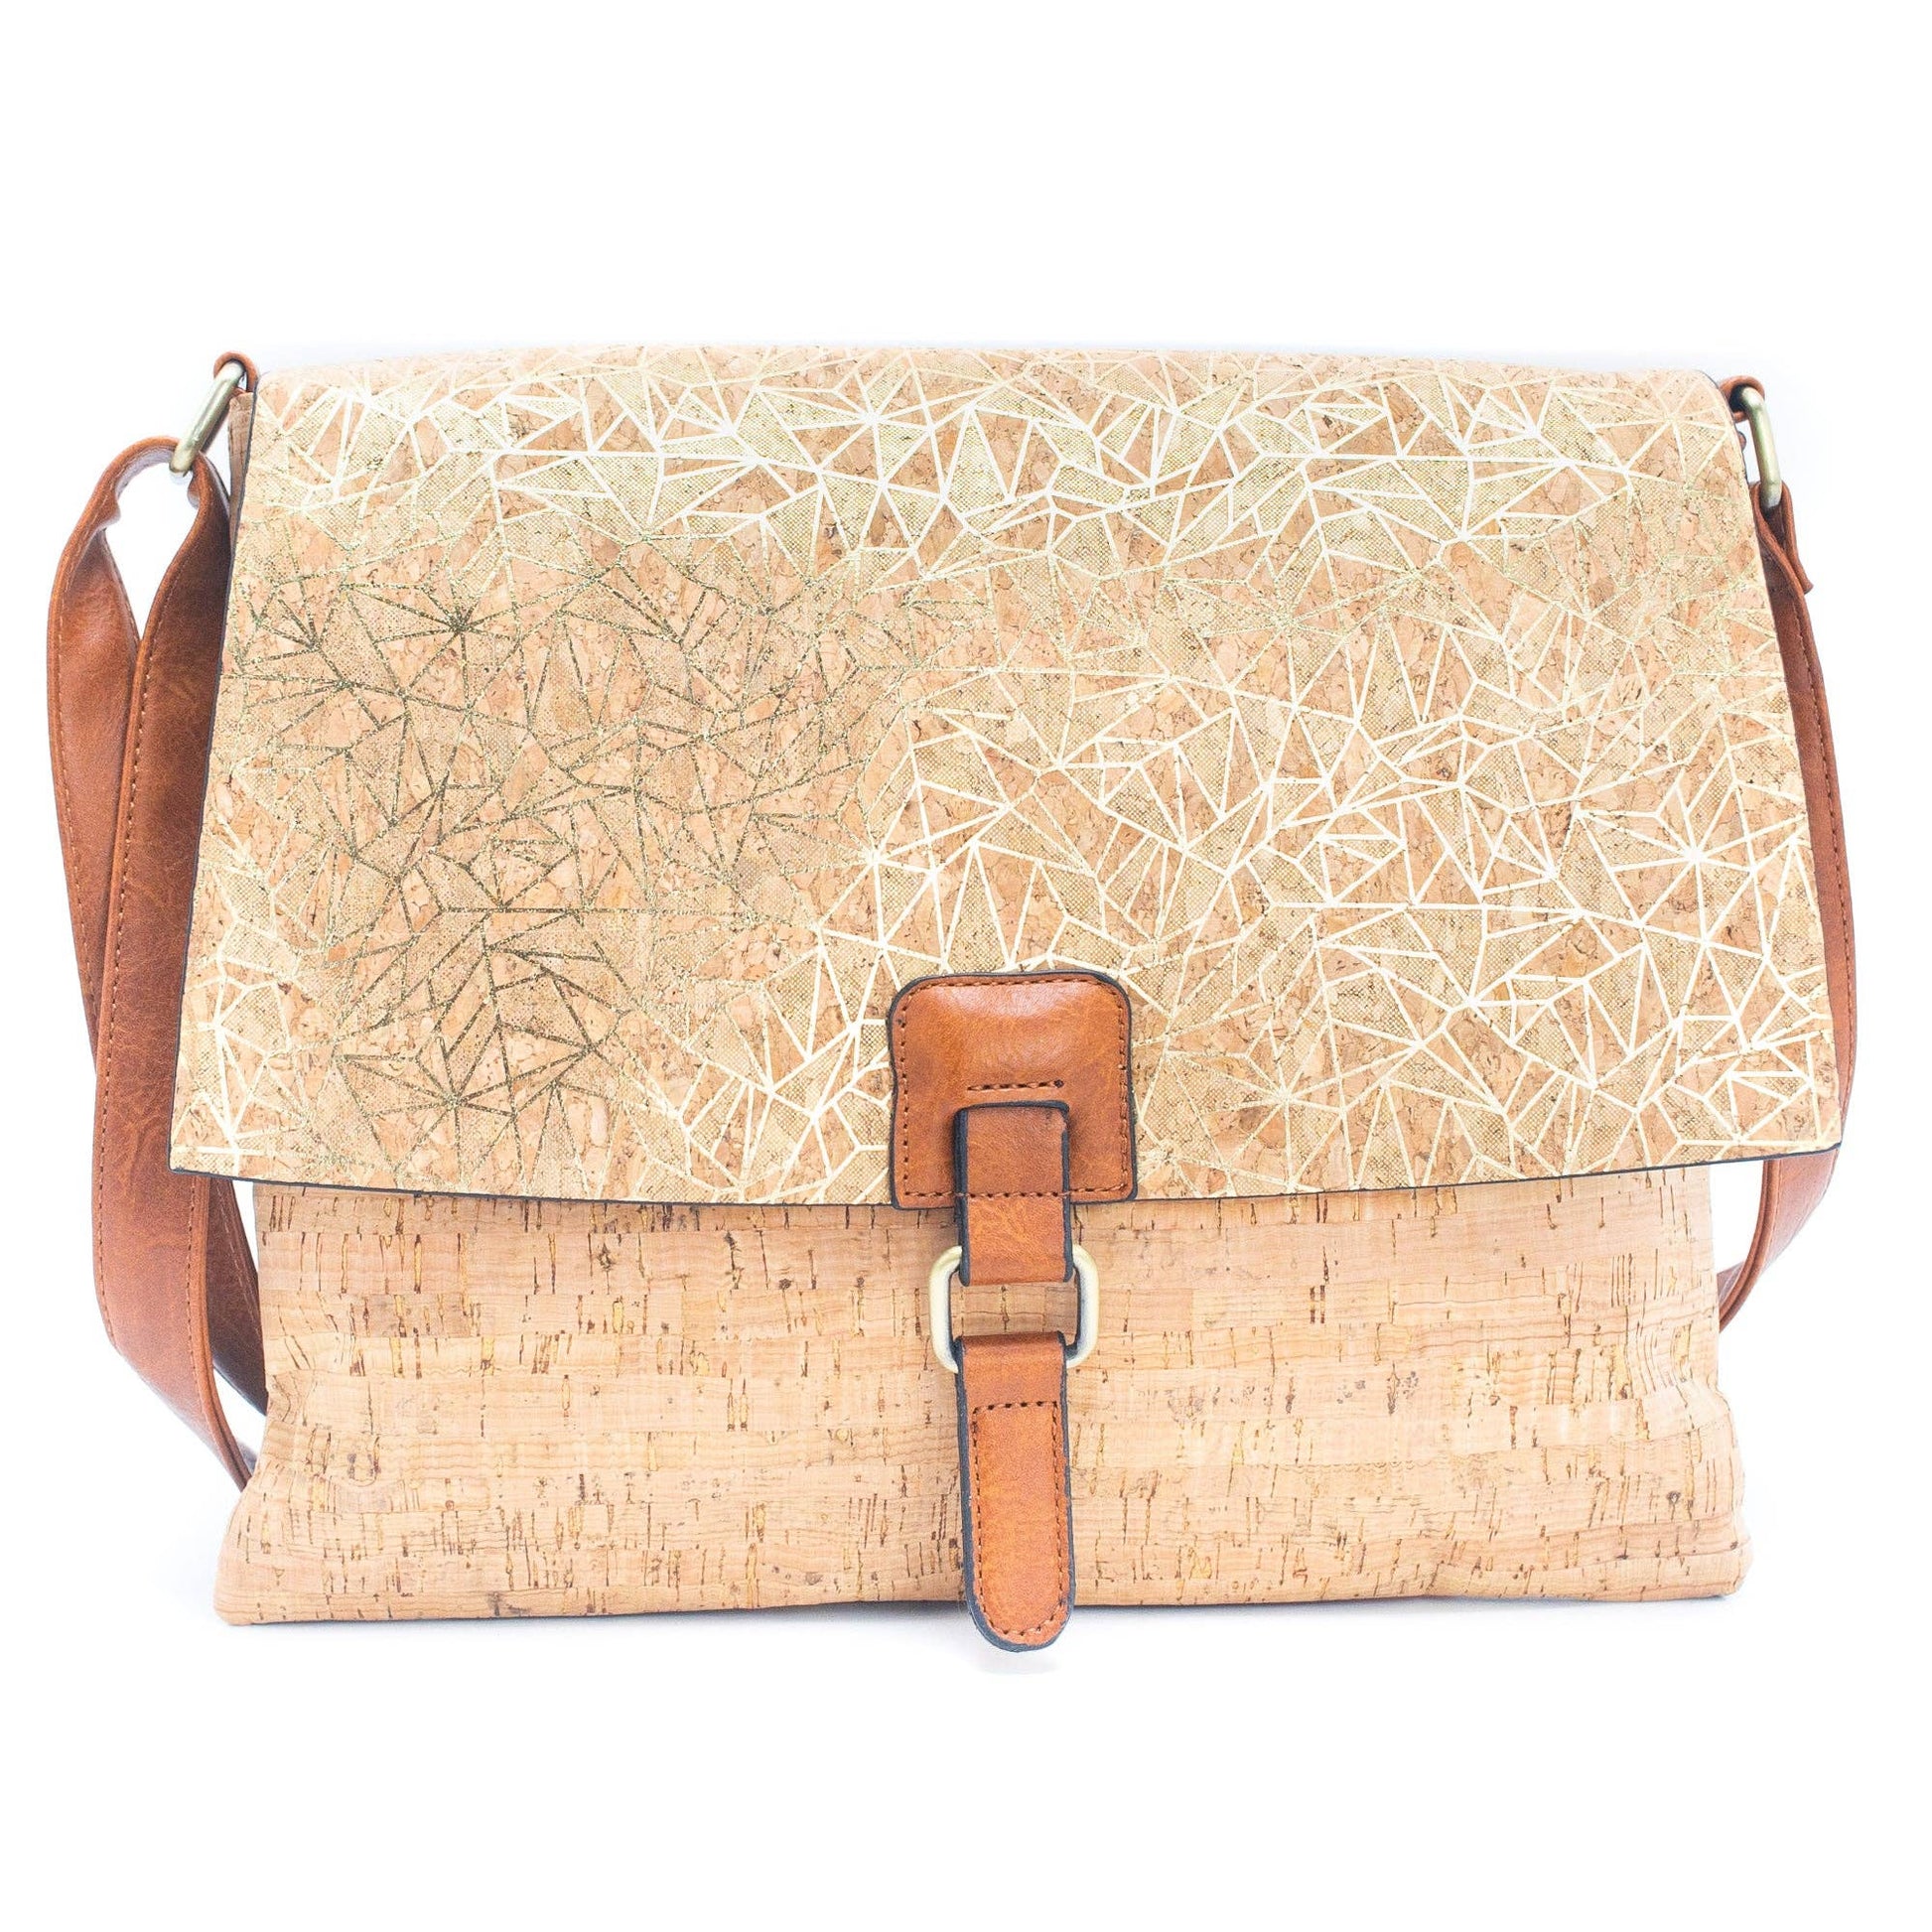 Cork Crossbody Bag with Mosaic and Floral Prints BAGD-464-11